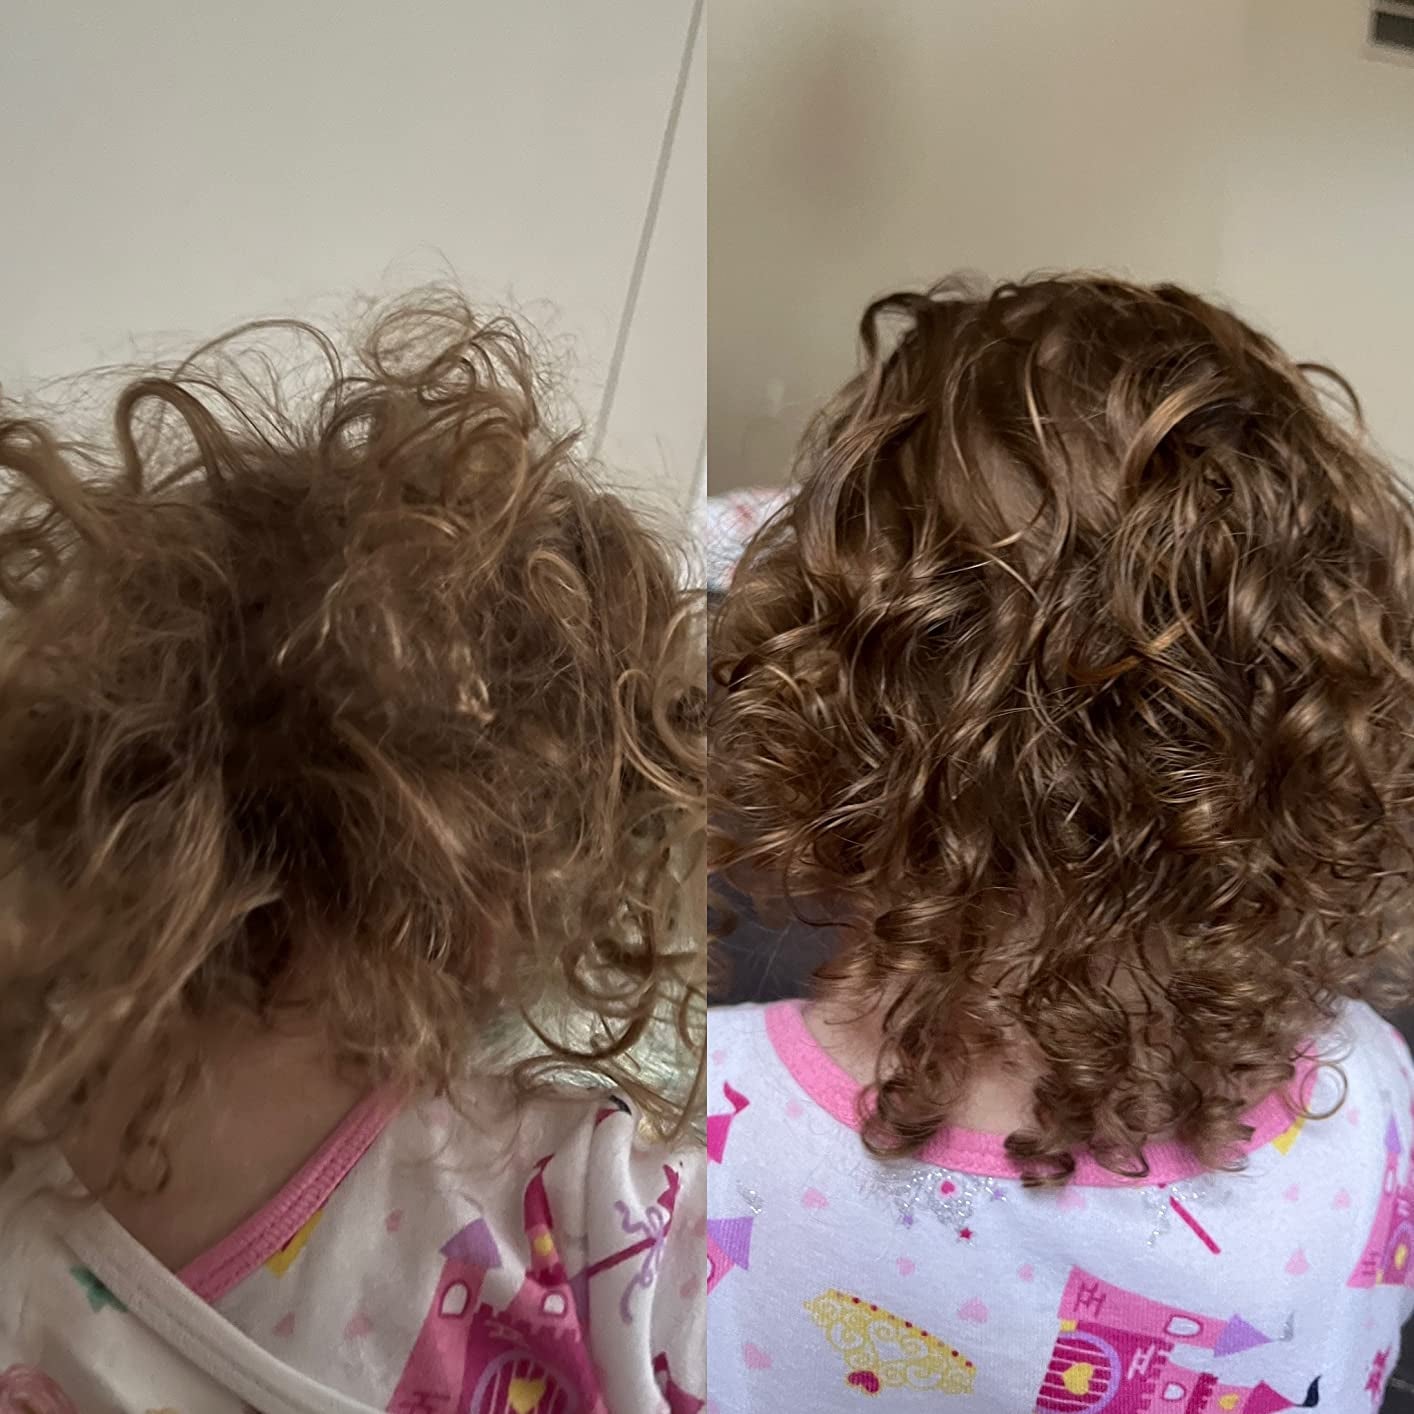 reviewers child's tangled hair and then their hair detangled after using conditioning spray